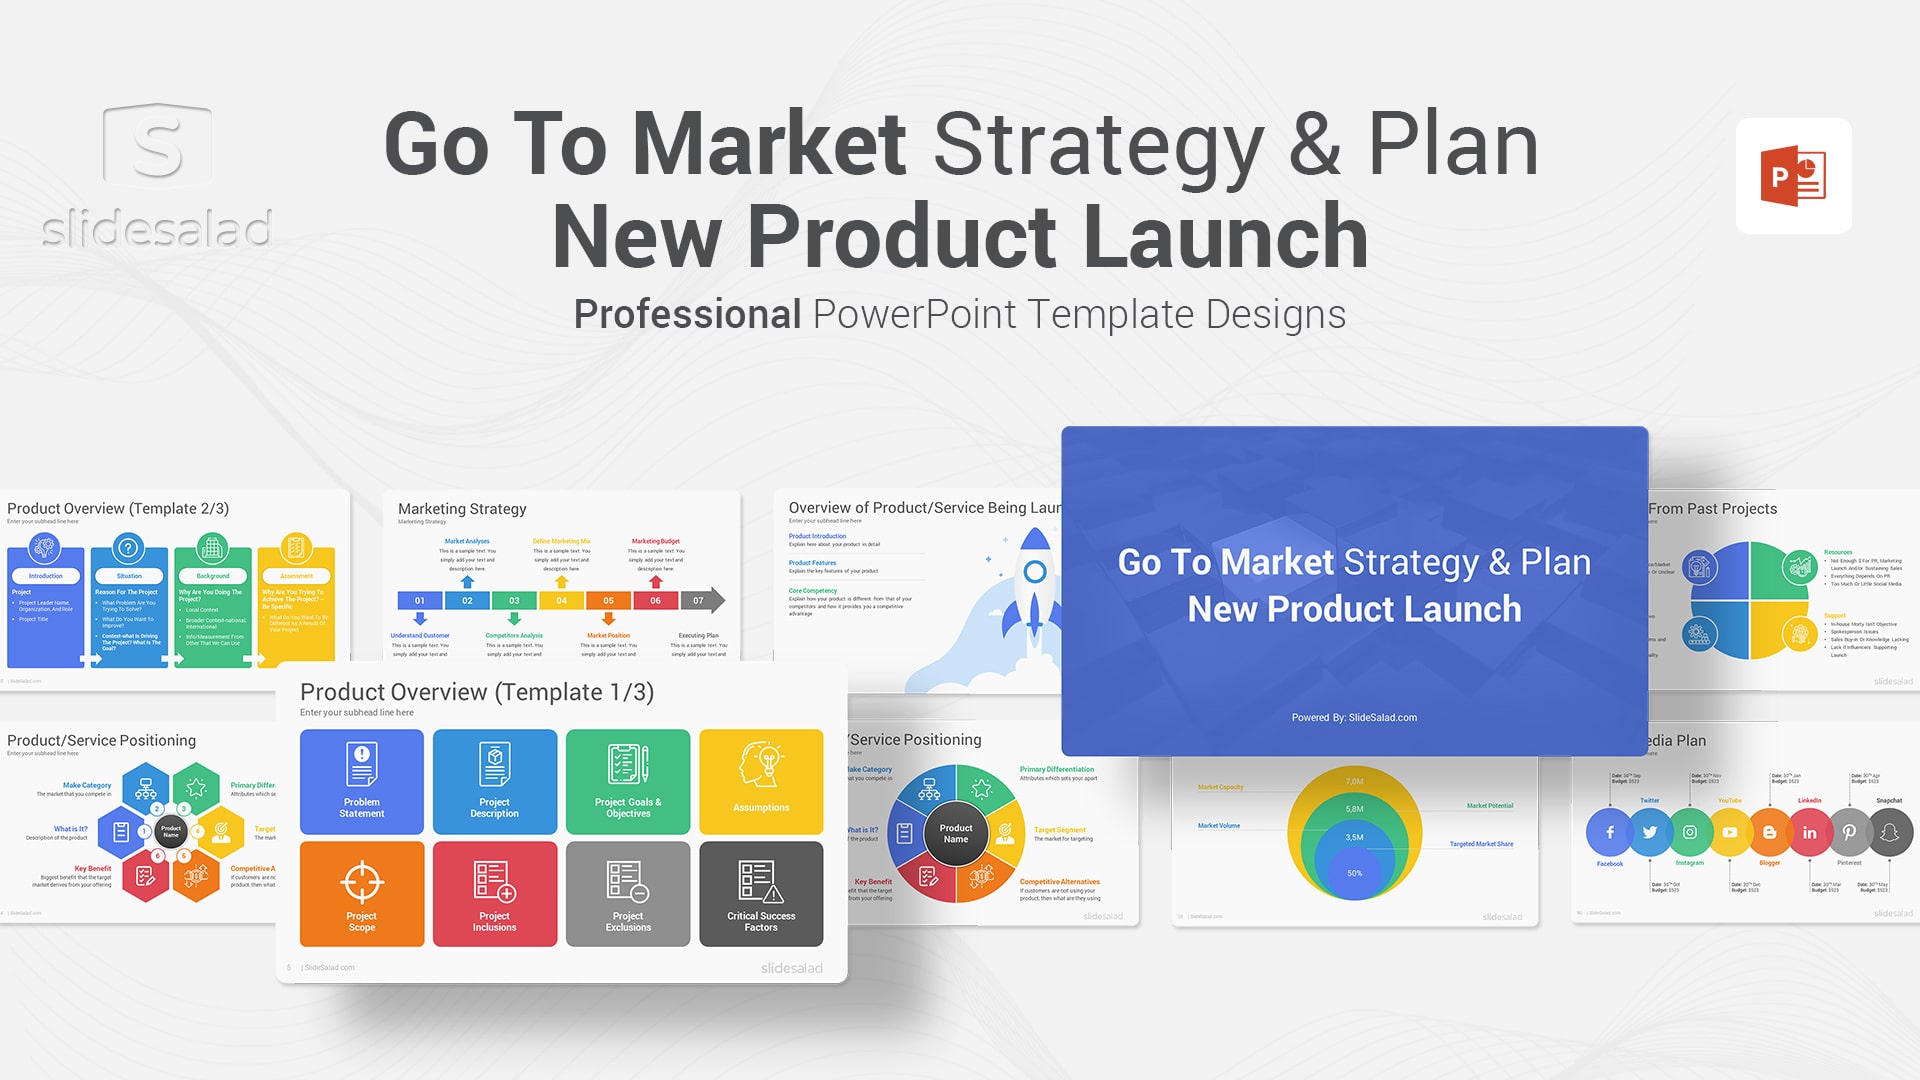 New Product Launch Go to Market Plan and Strategy PowerPoint Template - Structured Templates for Launching New Products Successfully